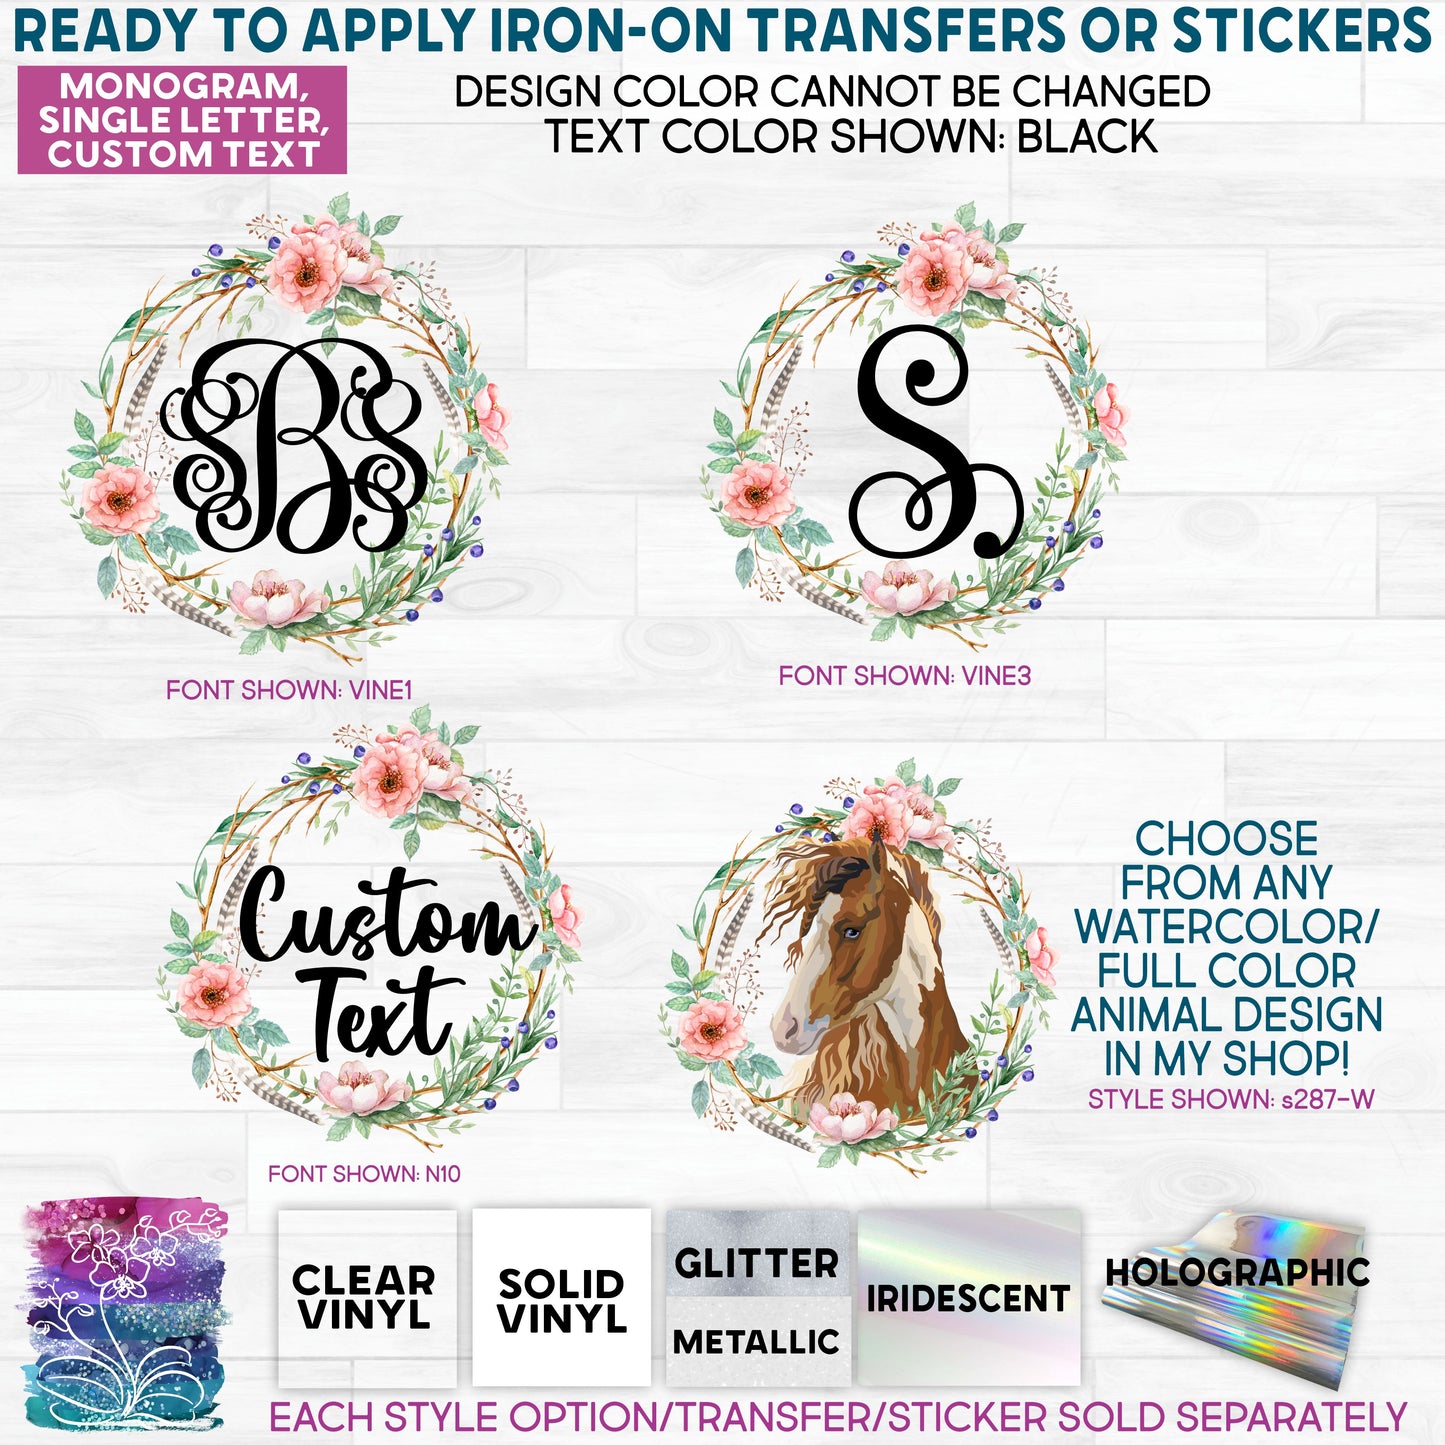 SBS-391-D Woodsy Rose Monogram Floral Watercolor Made-to-Order Iron-On Transfer or Sticker